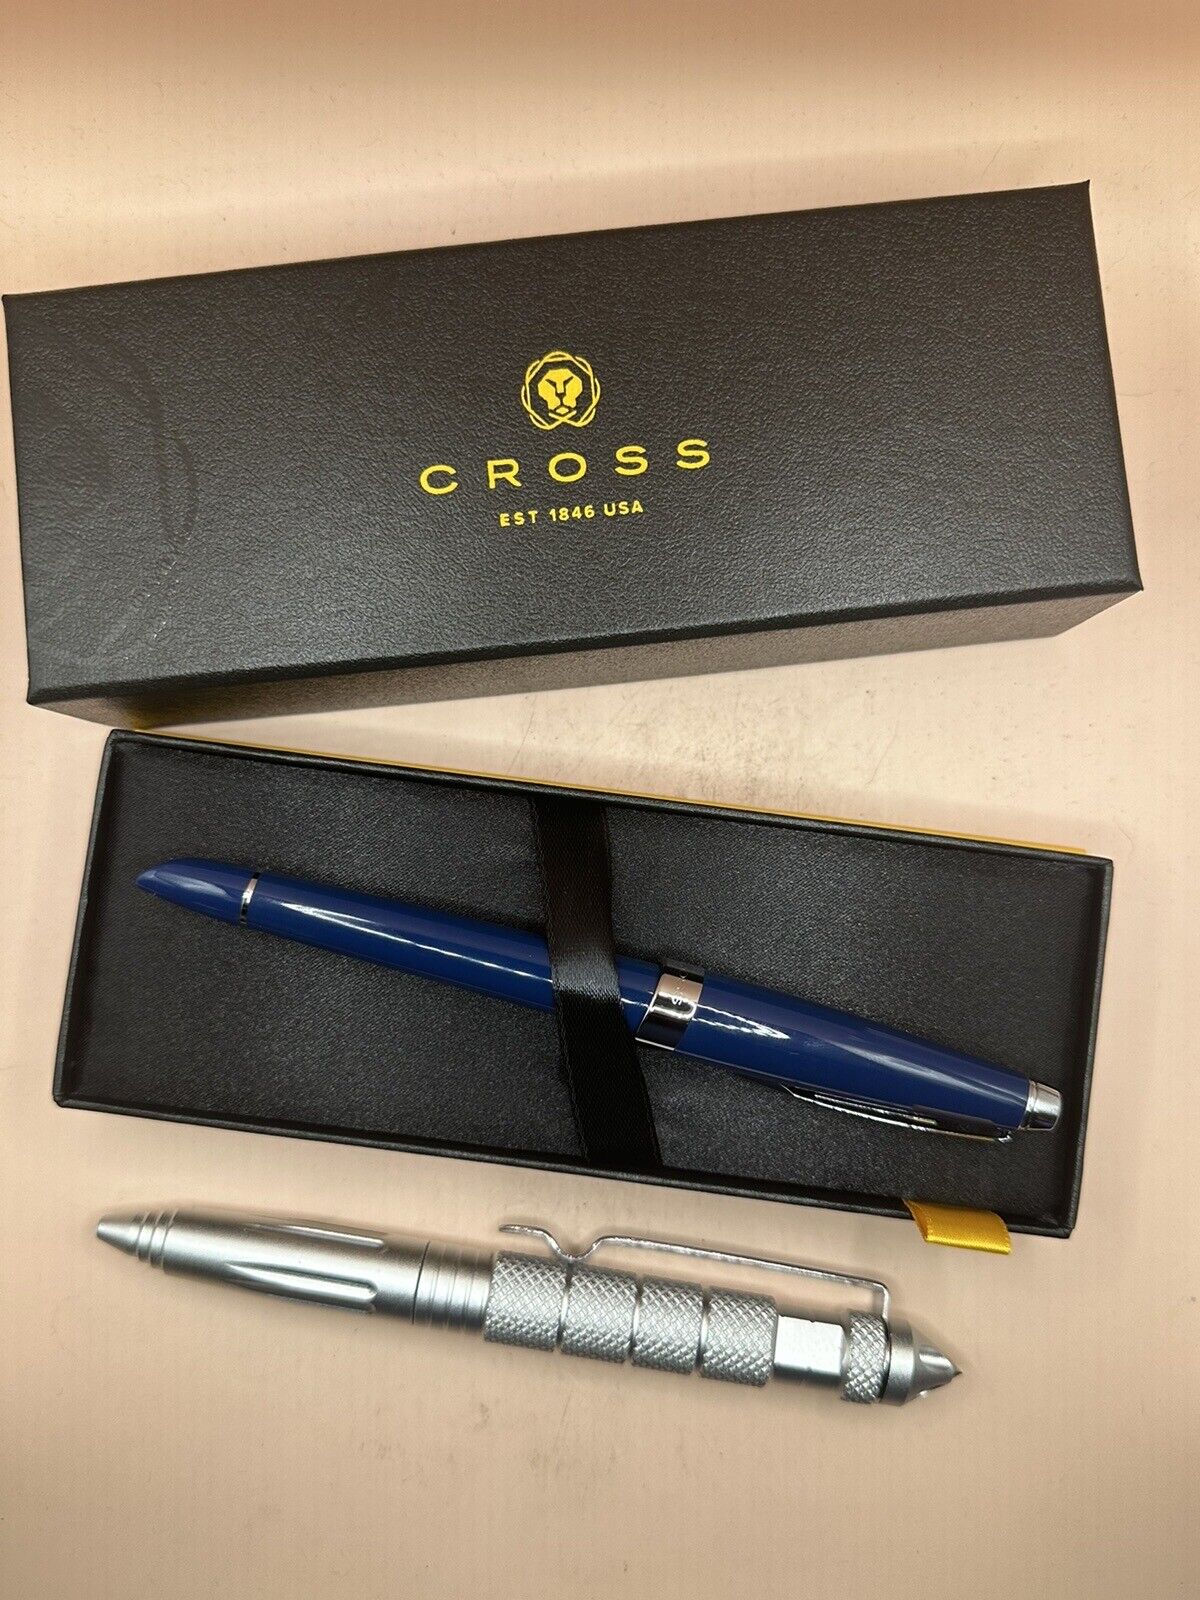 Cross Rollerball Pen Aventura Starry Blue with Chrome AT0155-2 & FREE Tac Pen